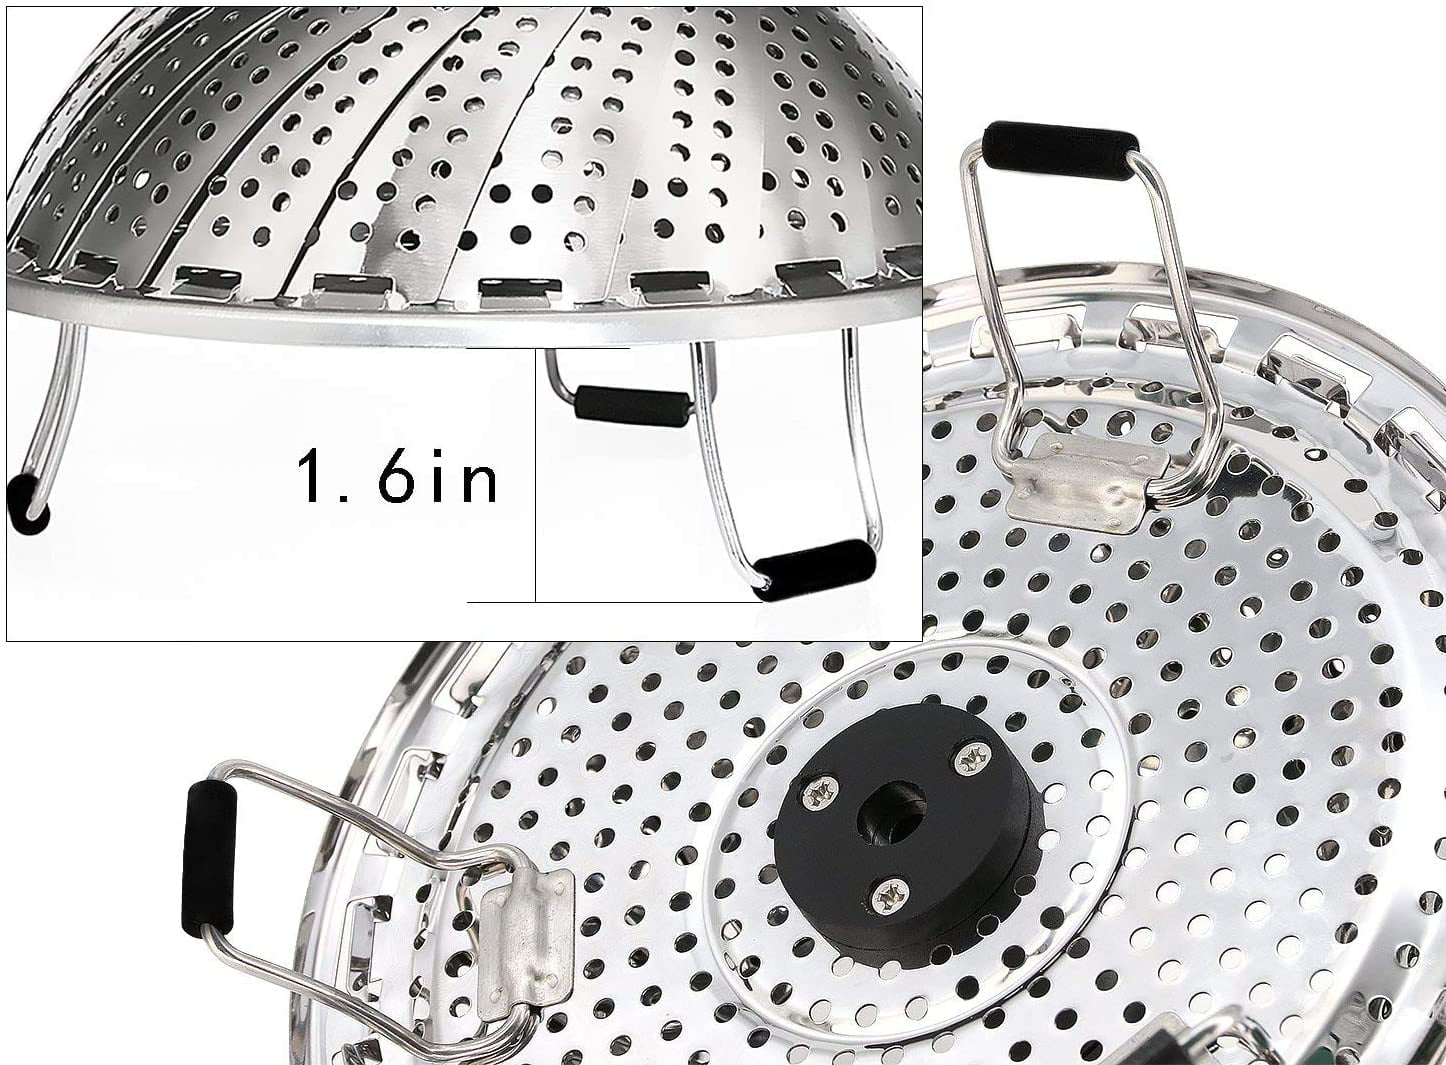 Pro Chef Kitchen Tools Stainless Steel Vegetable Steamer Basket - Set of 2  Collapsible Folding Steamers to Fit All Instant Pot Pressure Cookers and  Stove Top Pots for Perfect Veggies – Pro